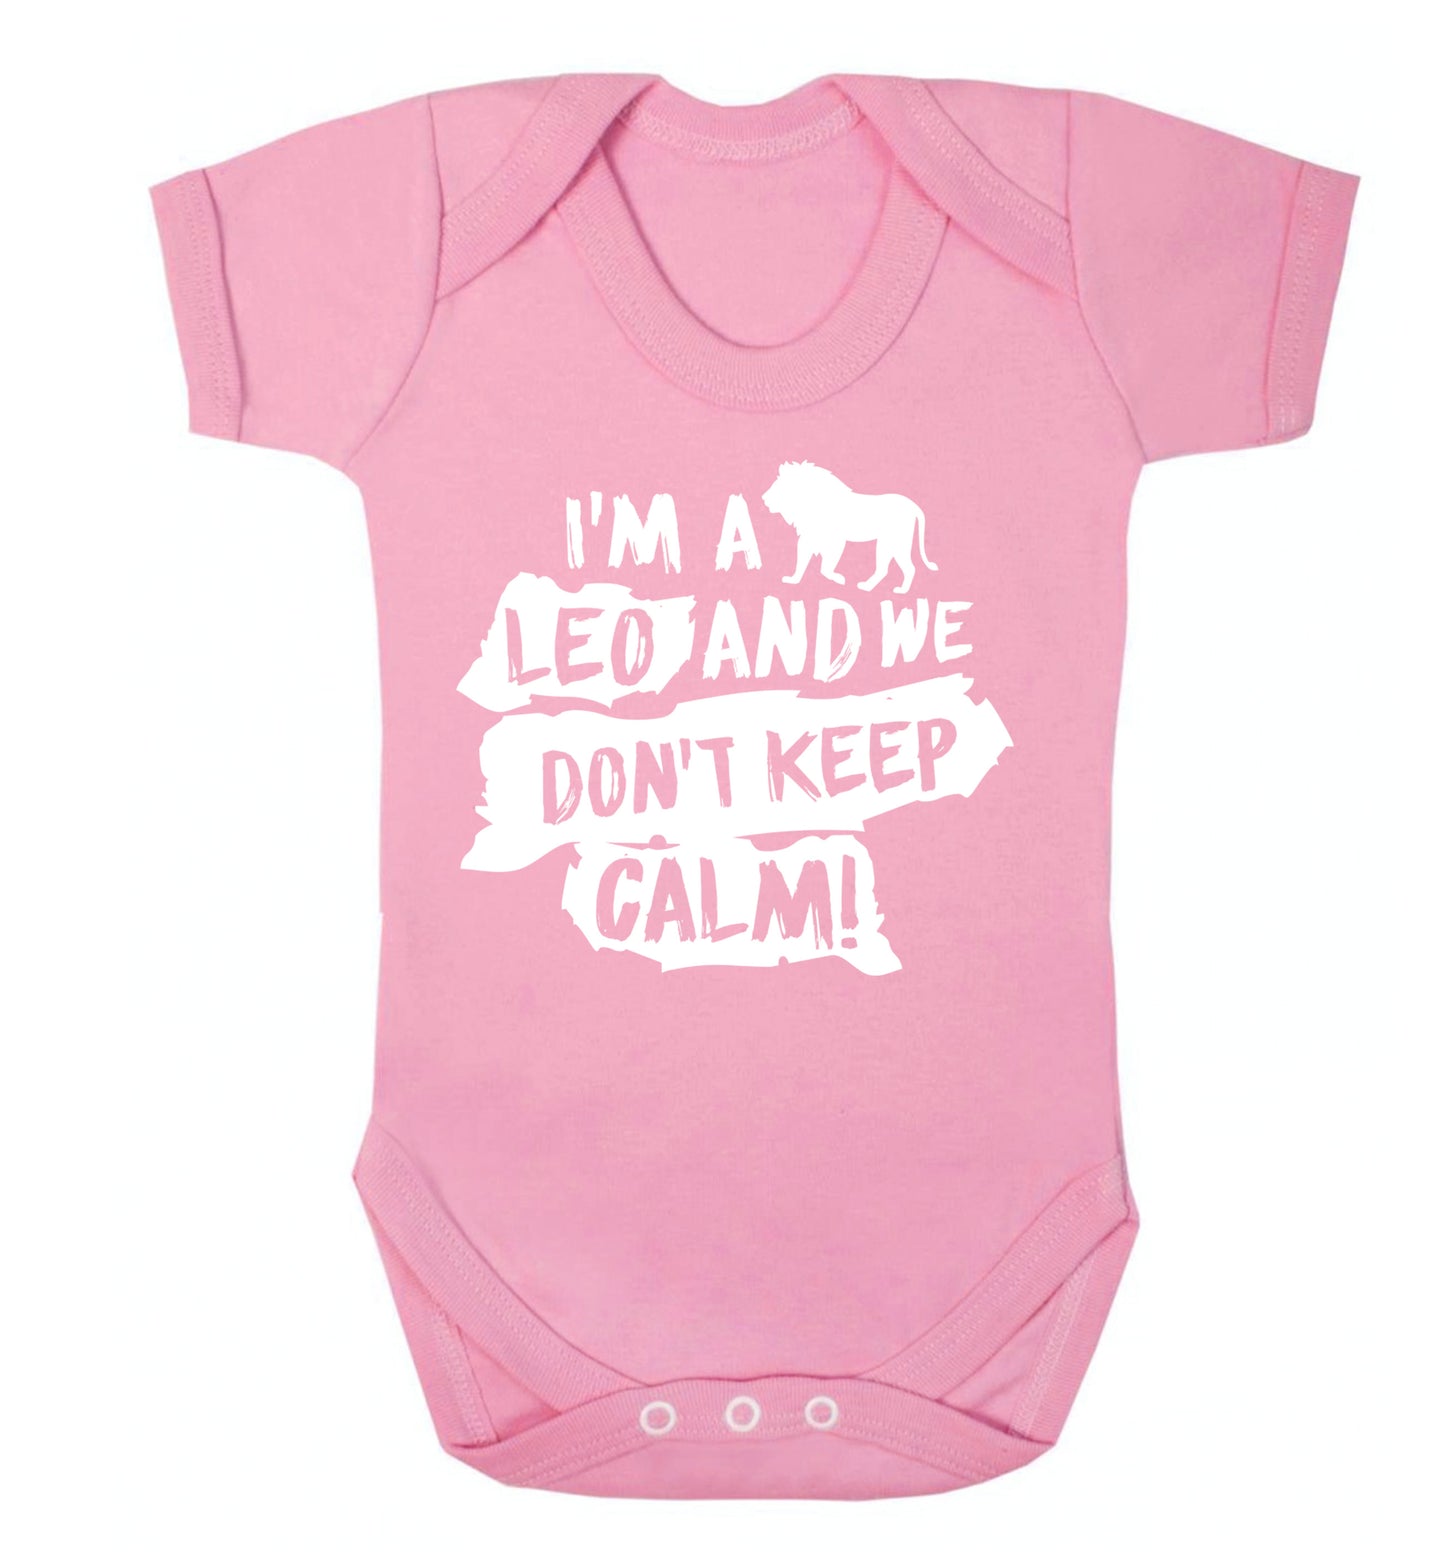 I'm a leo and we don't keep calm! Baby Vest pale pink 18-24 months